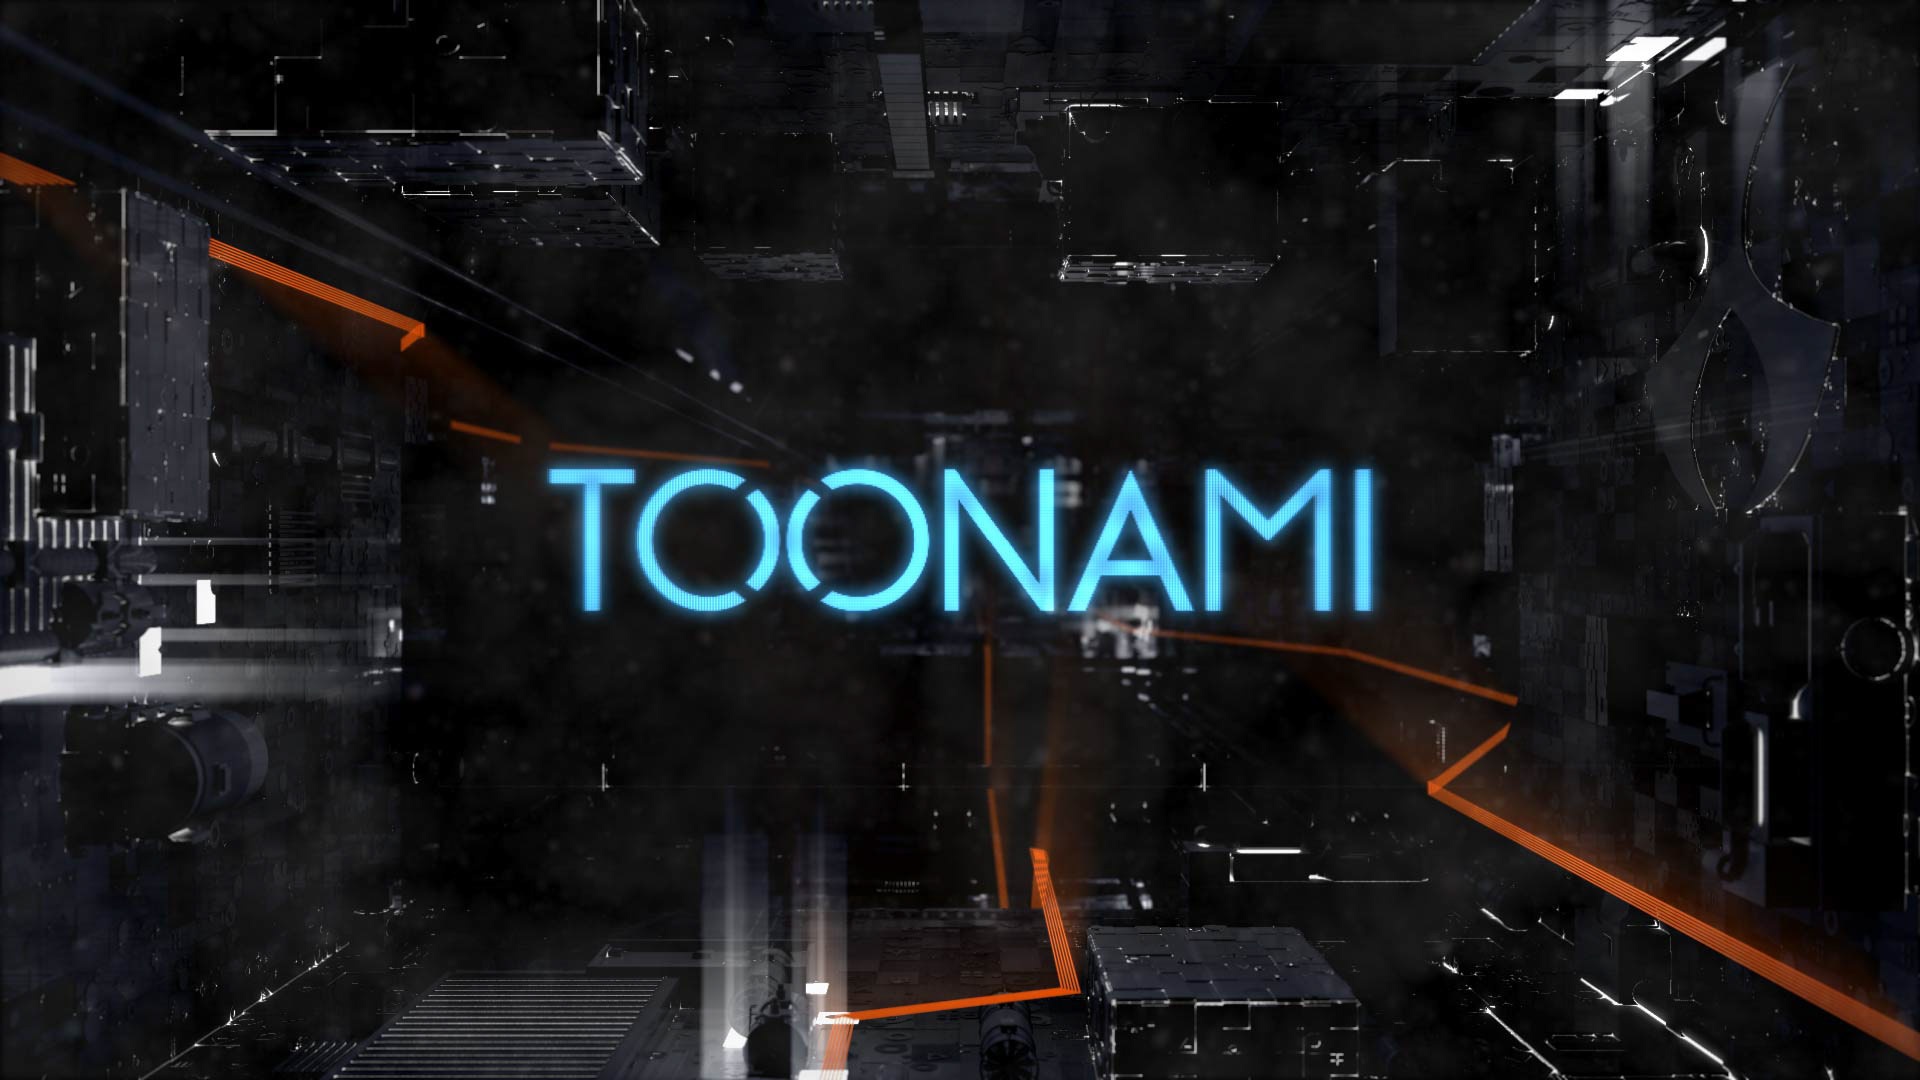 Toonami Faithful Here is What’s on the Schedule for Saturday